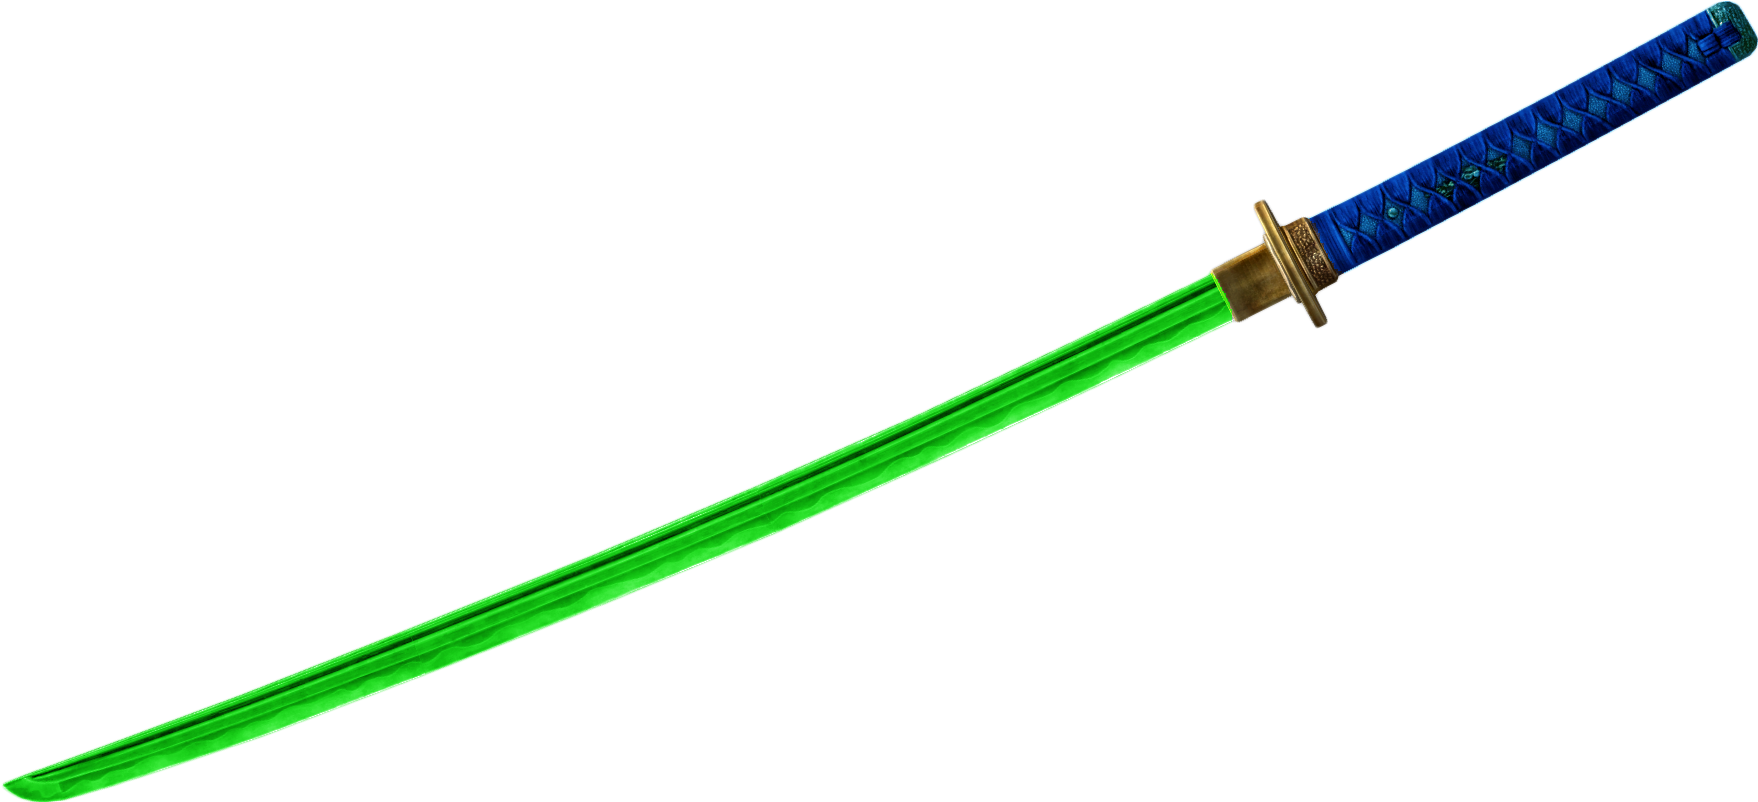 A Green Sword With A Gold Handle